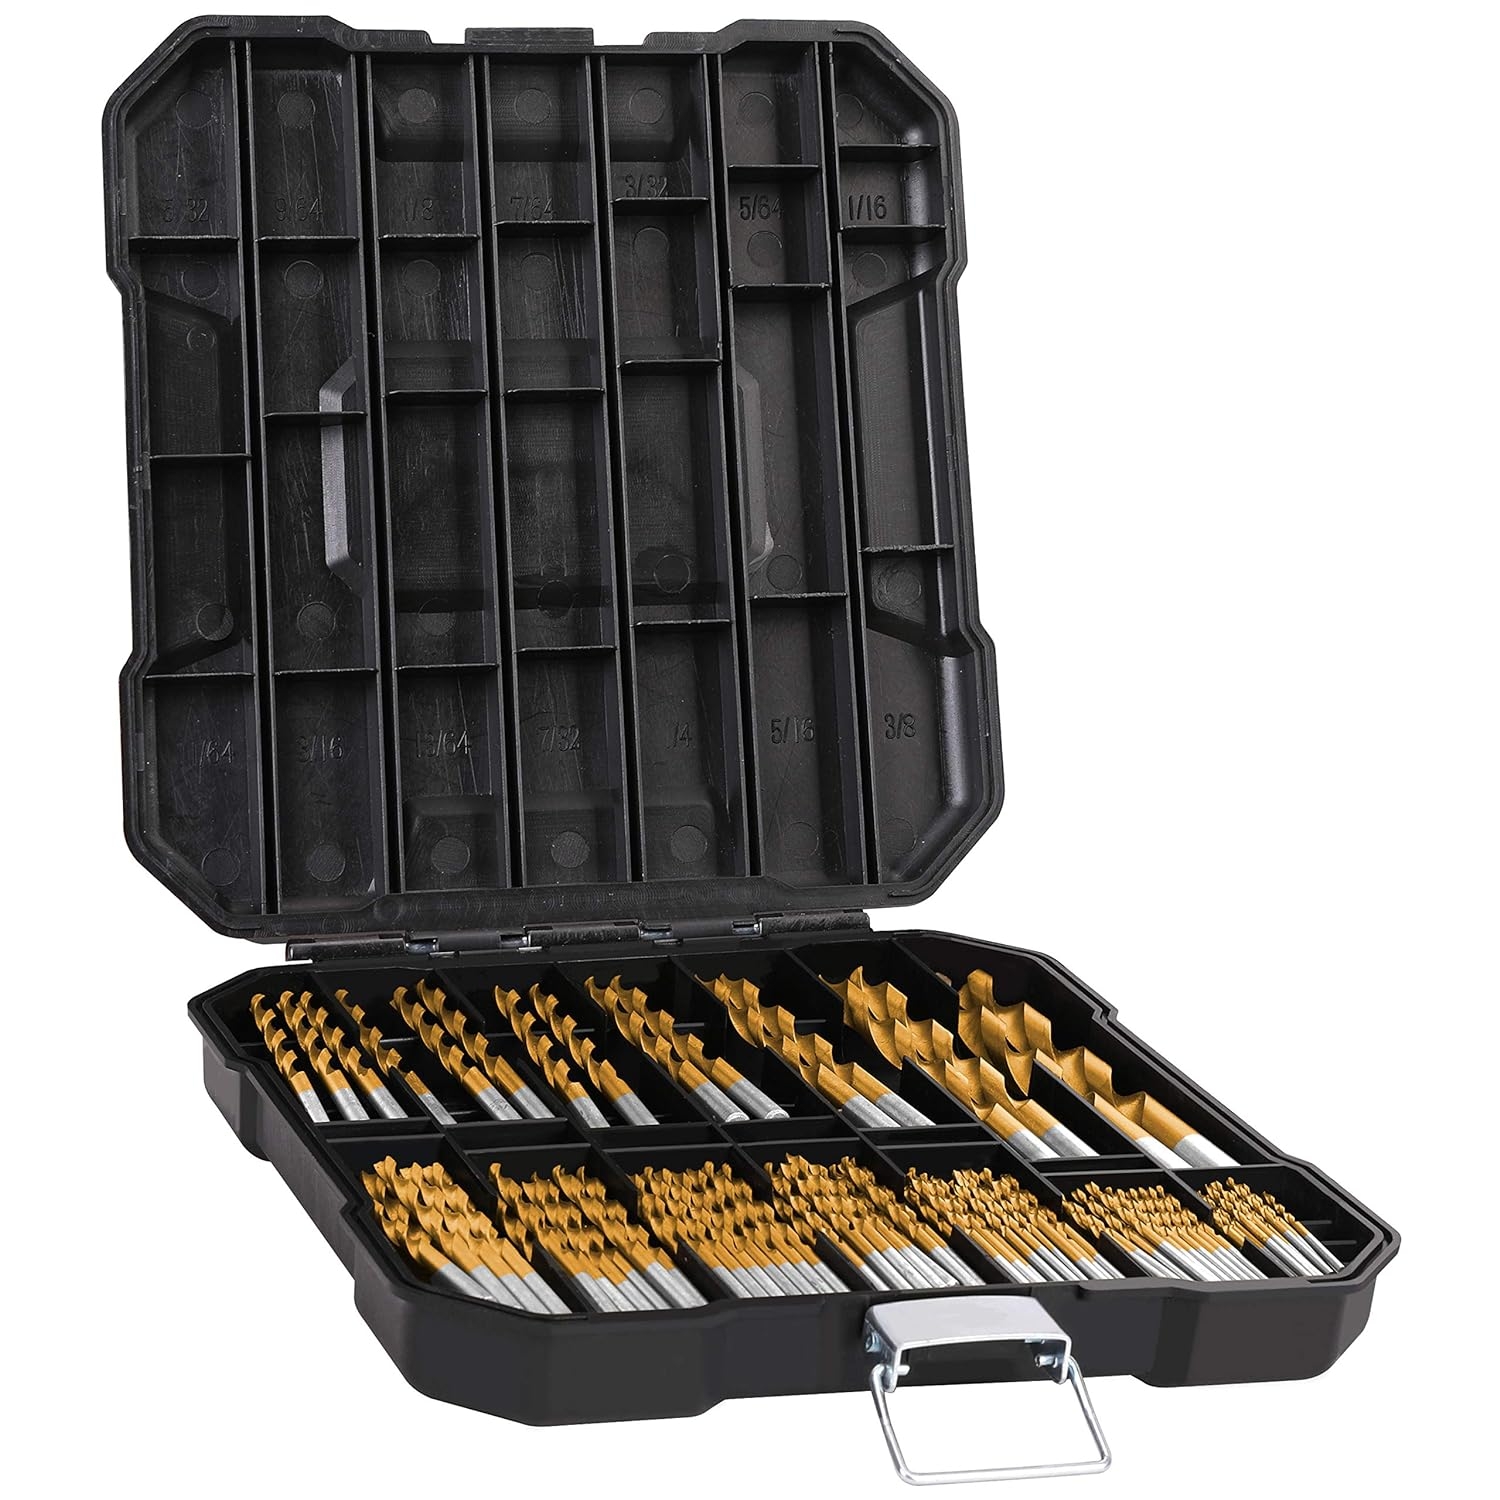 99 Pieces Titanium Twist Drill Bit Set, Anti-Walking 135° Tip High Speed Steel, Size from 1/16" up to 3/8", Ideal for Wood/Steel/Aluminum/Zinc Alloy, with Hard Storage